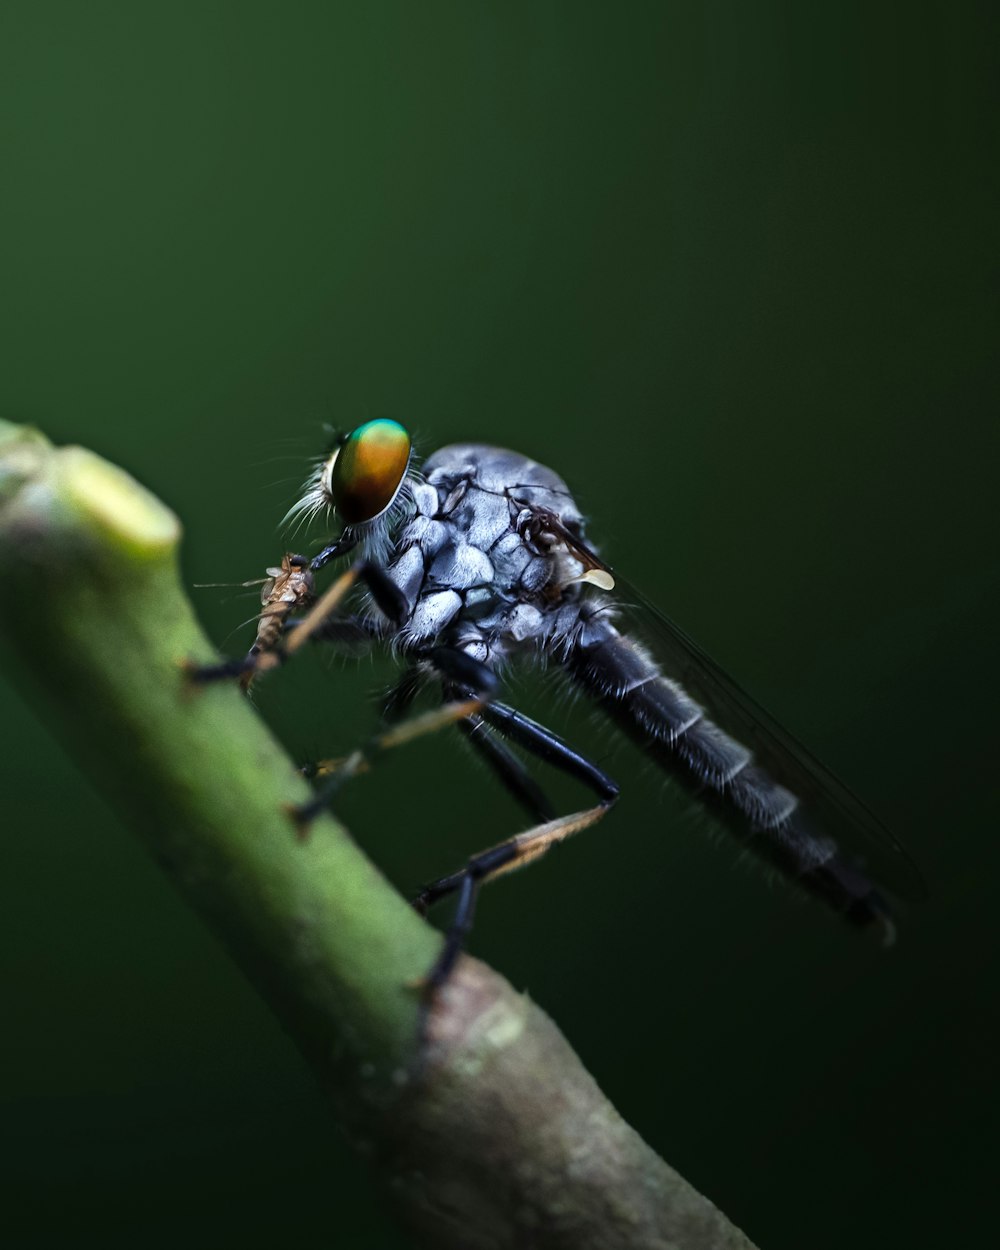 a close up of a fly on a twig